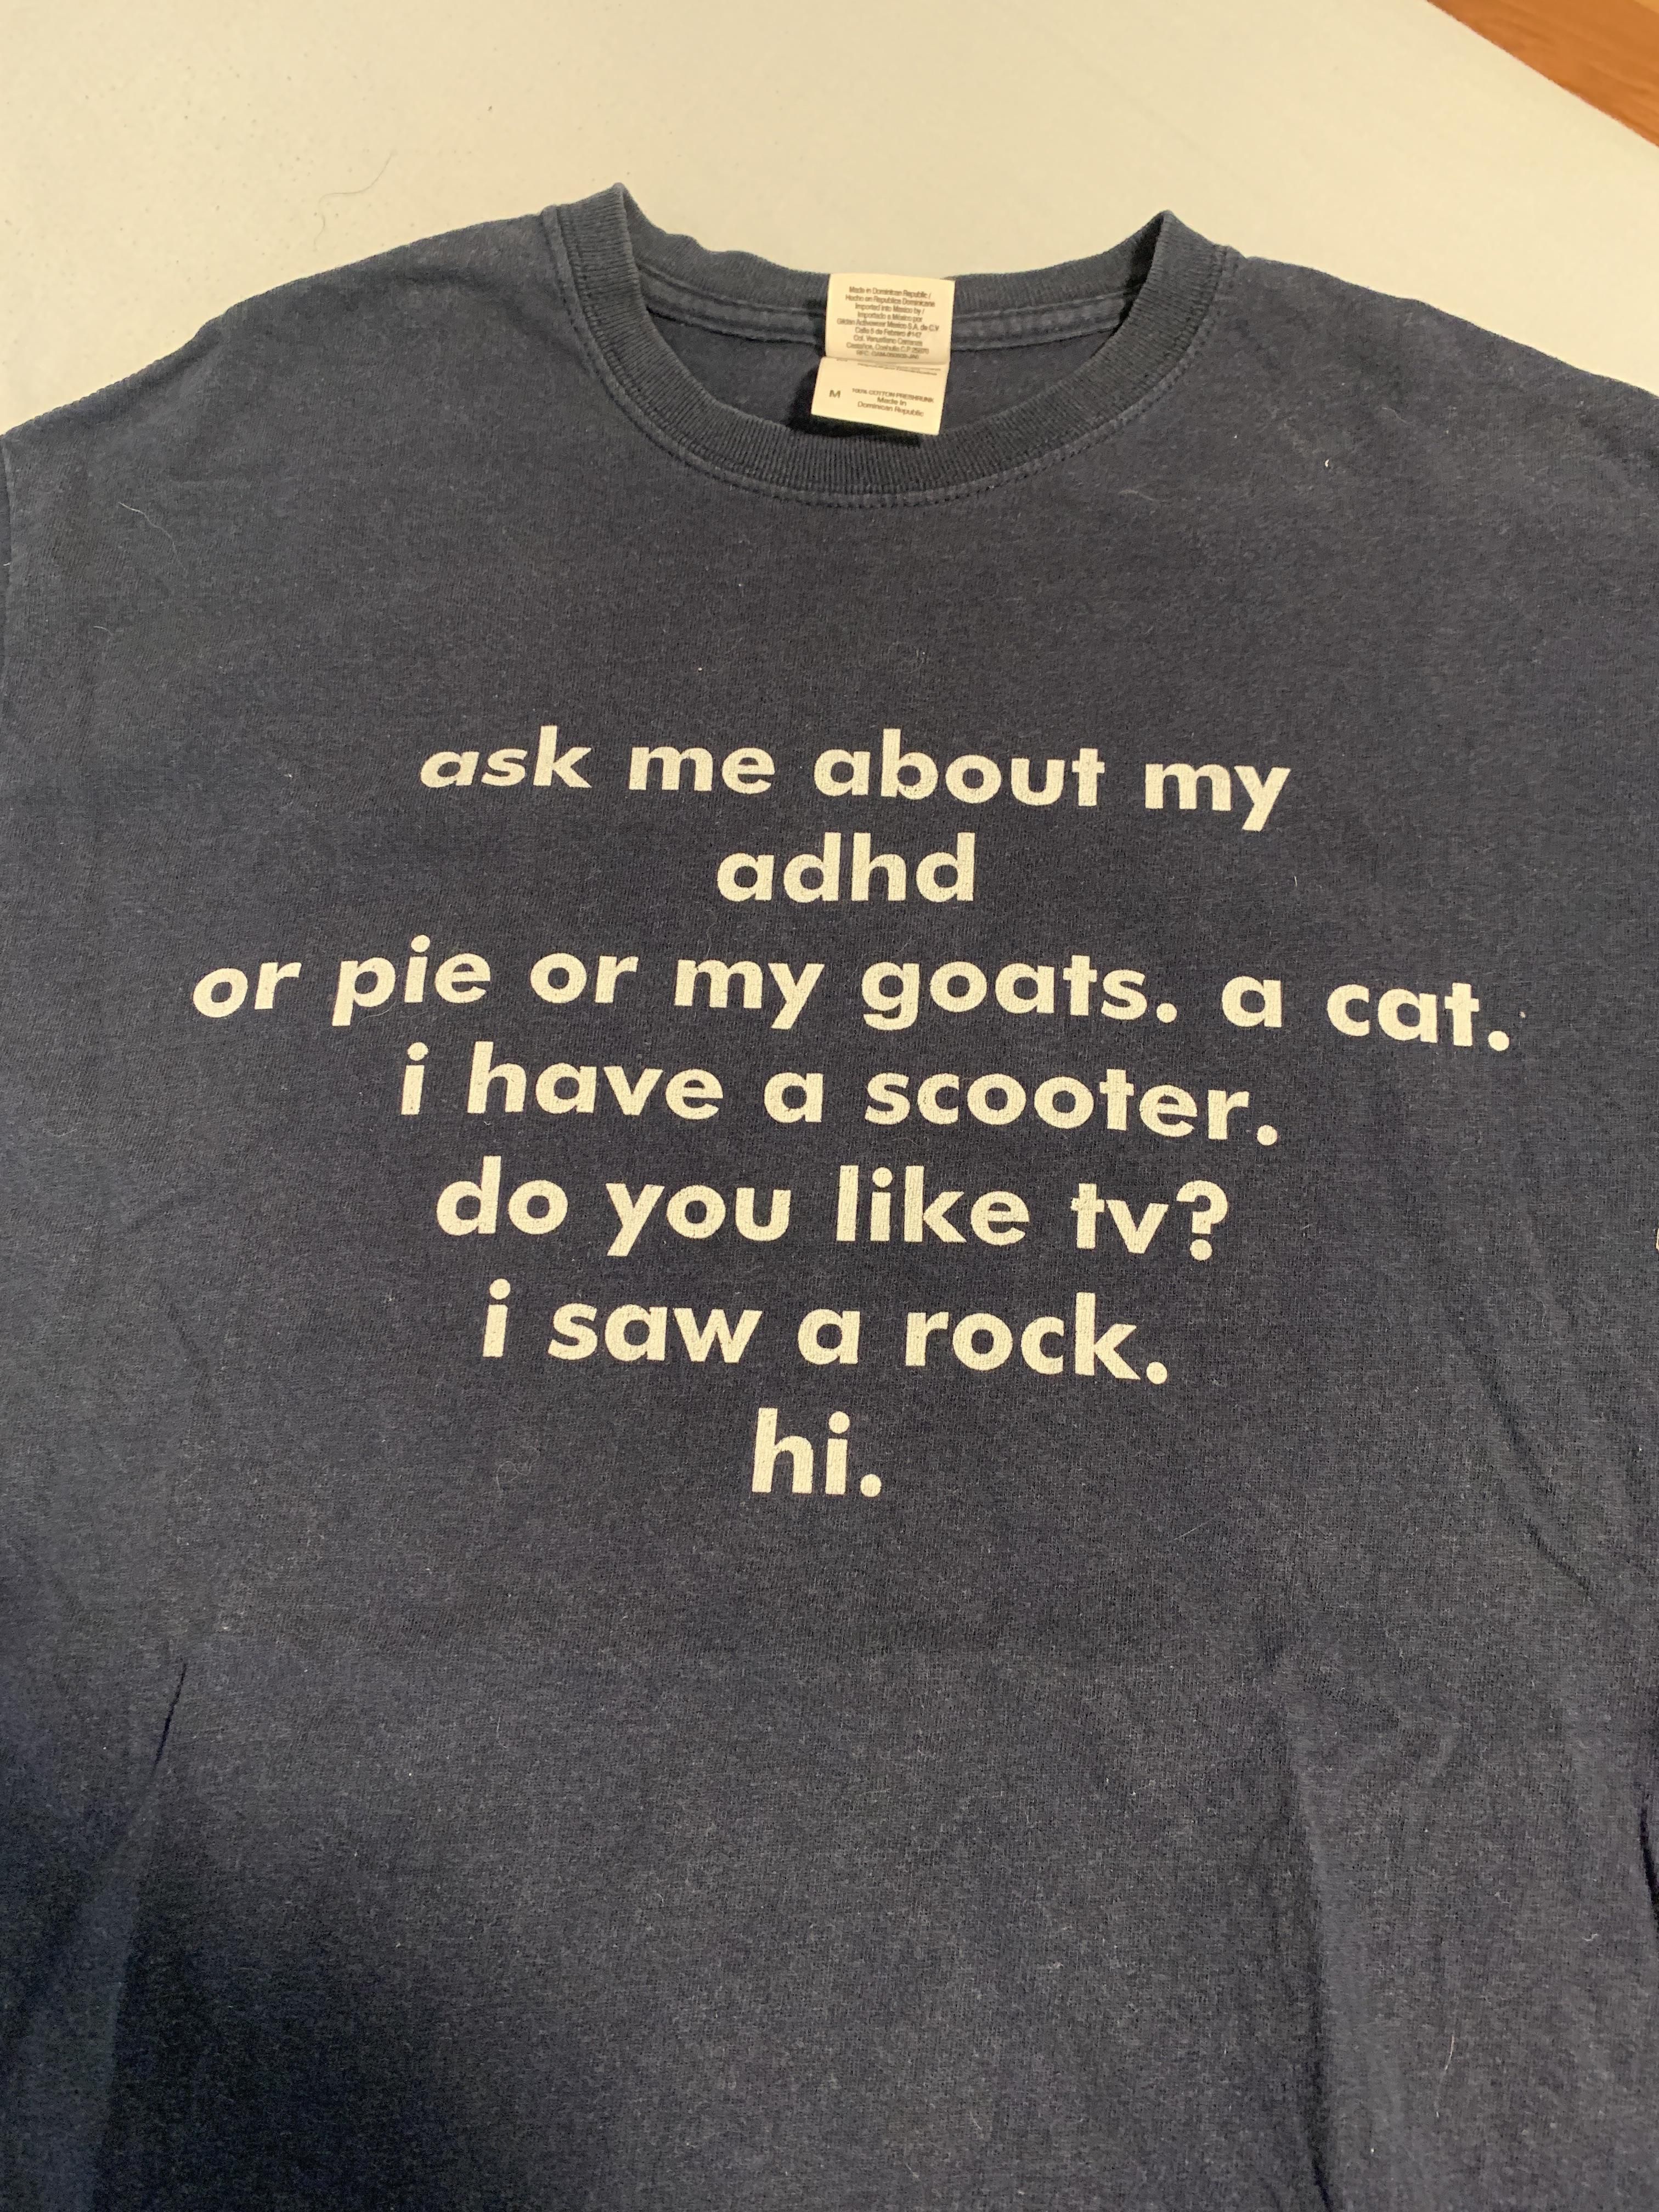 My wife had this shirt made for me.